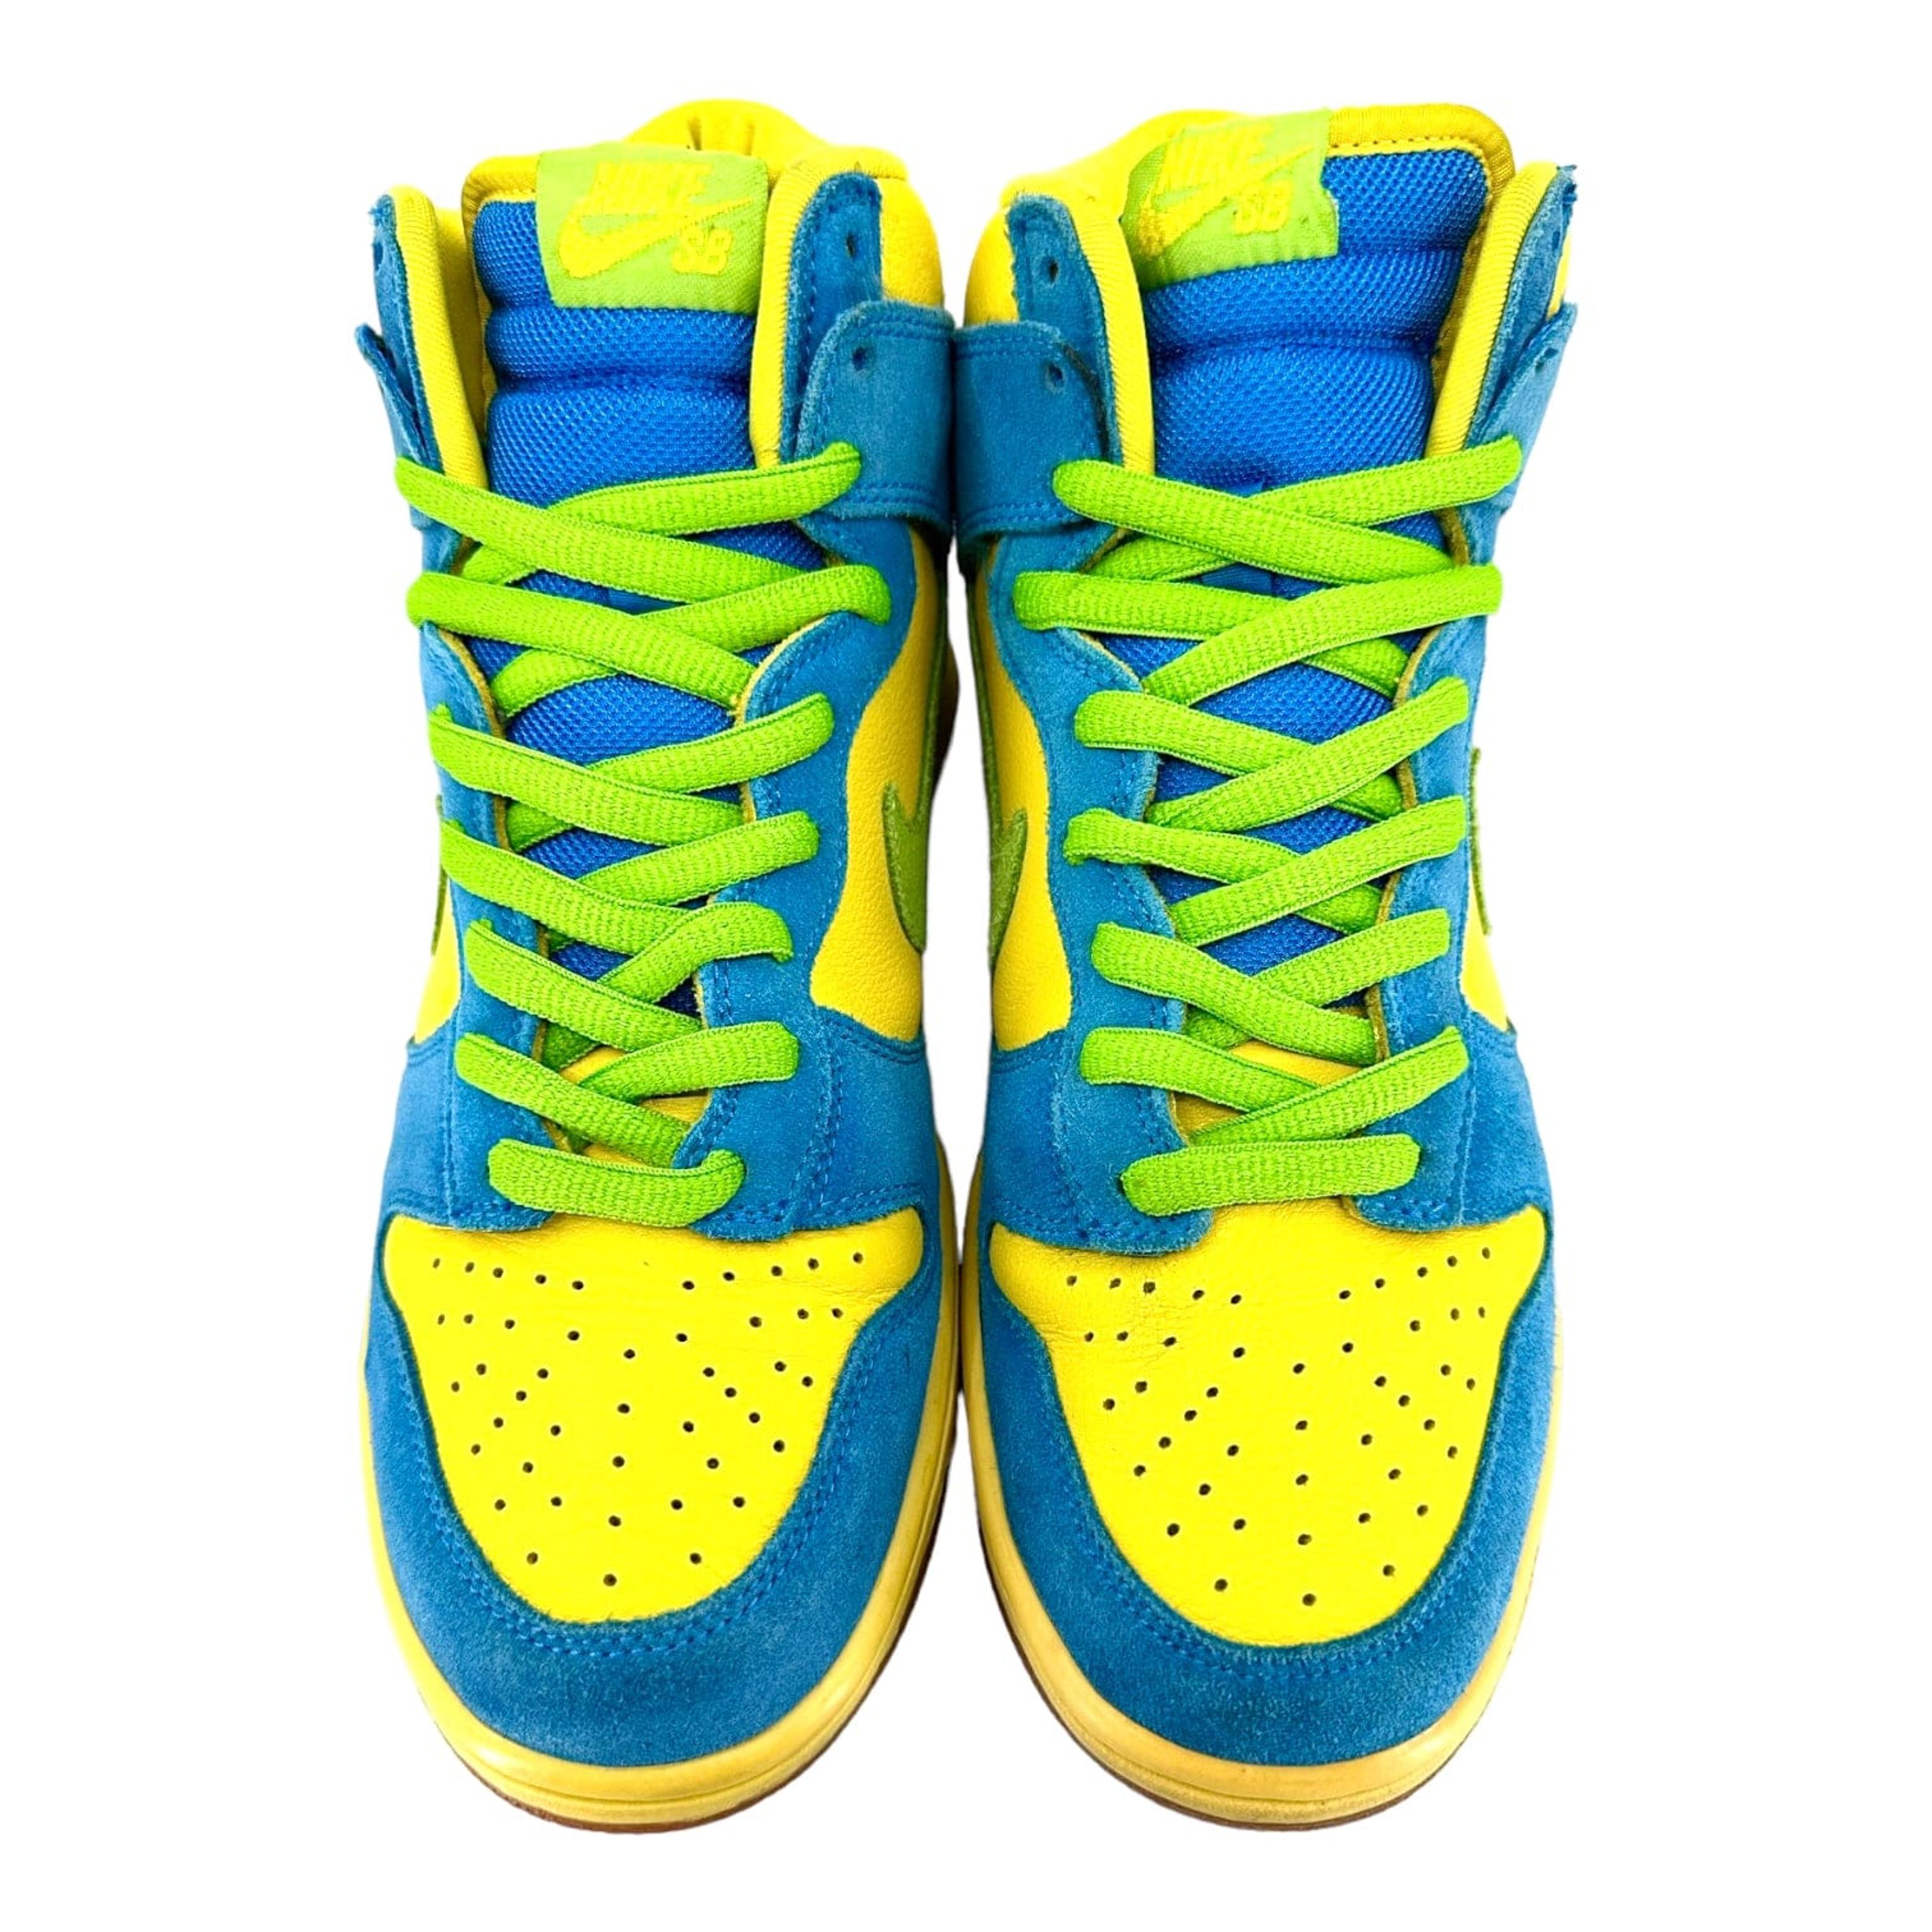 Alternate View 4 of Nike SB Dunk High Marge Simpson Pre-Owned